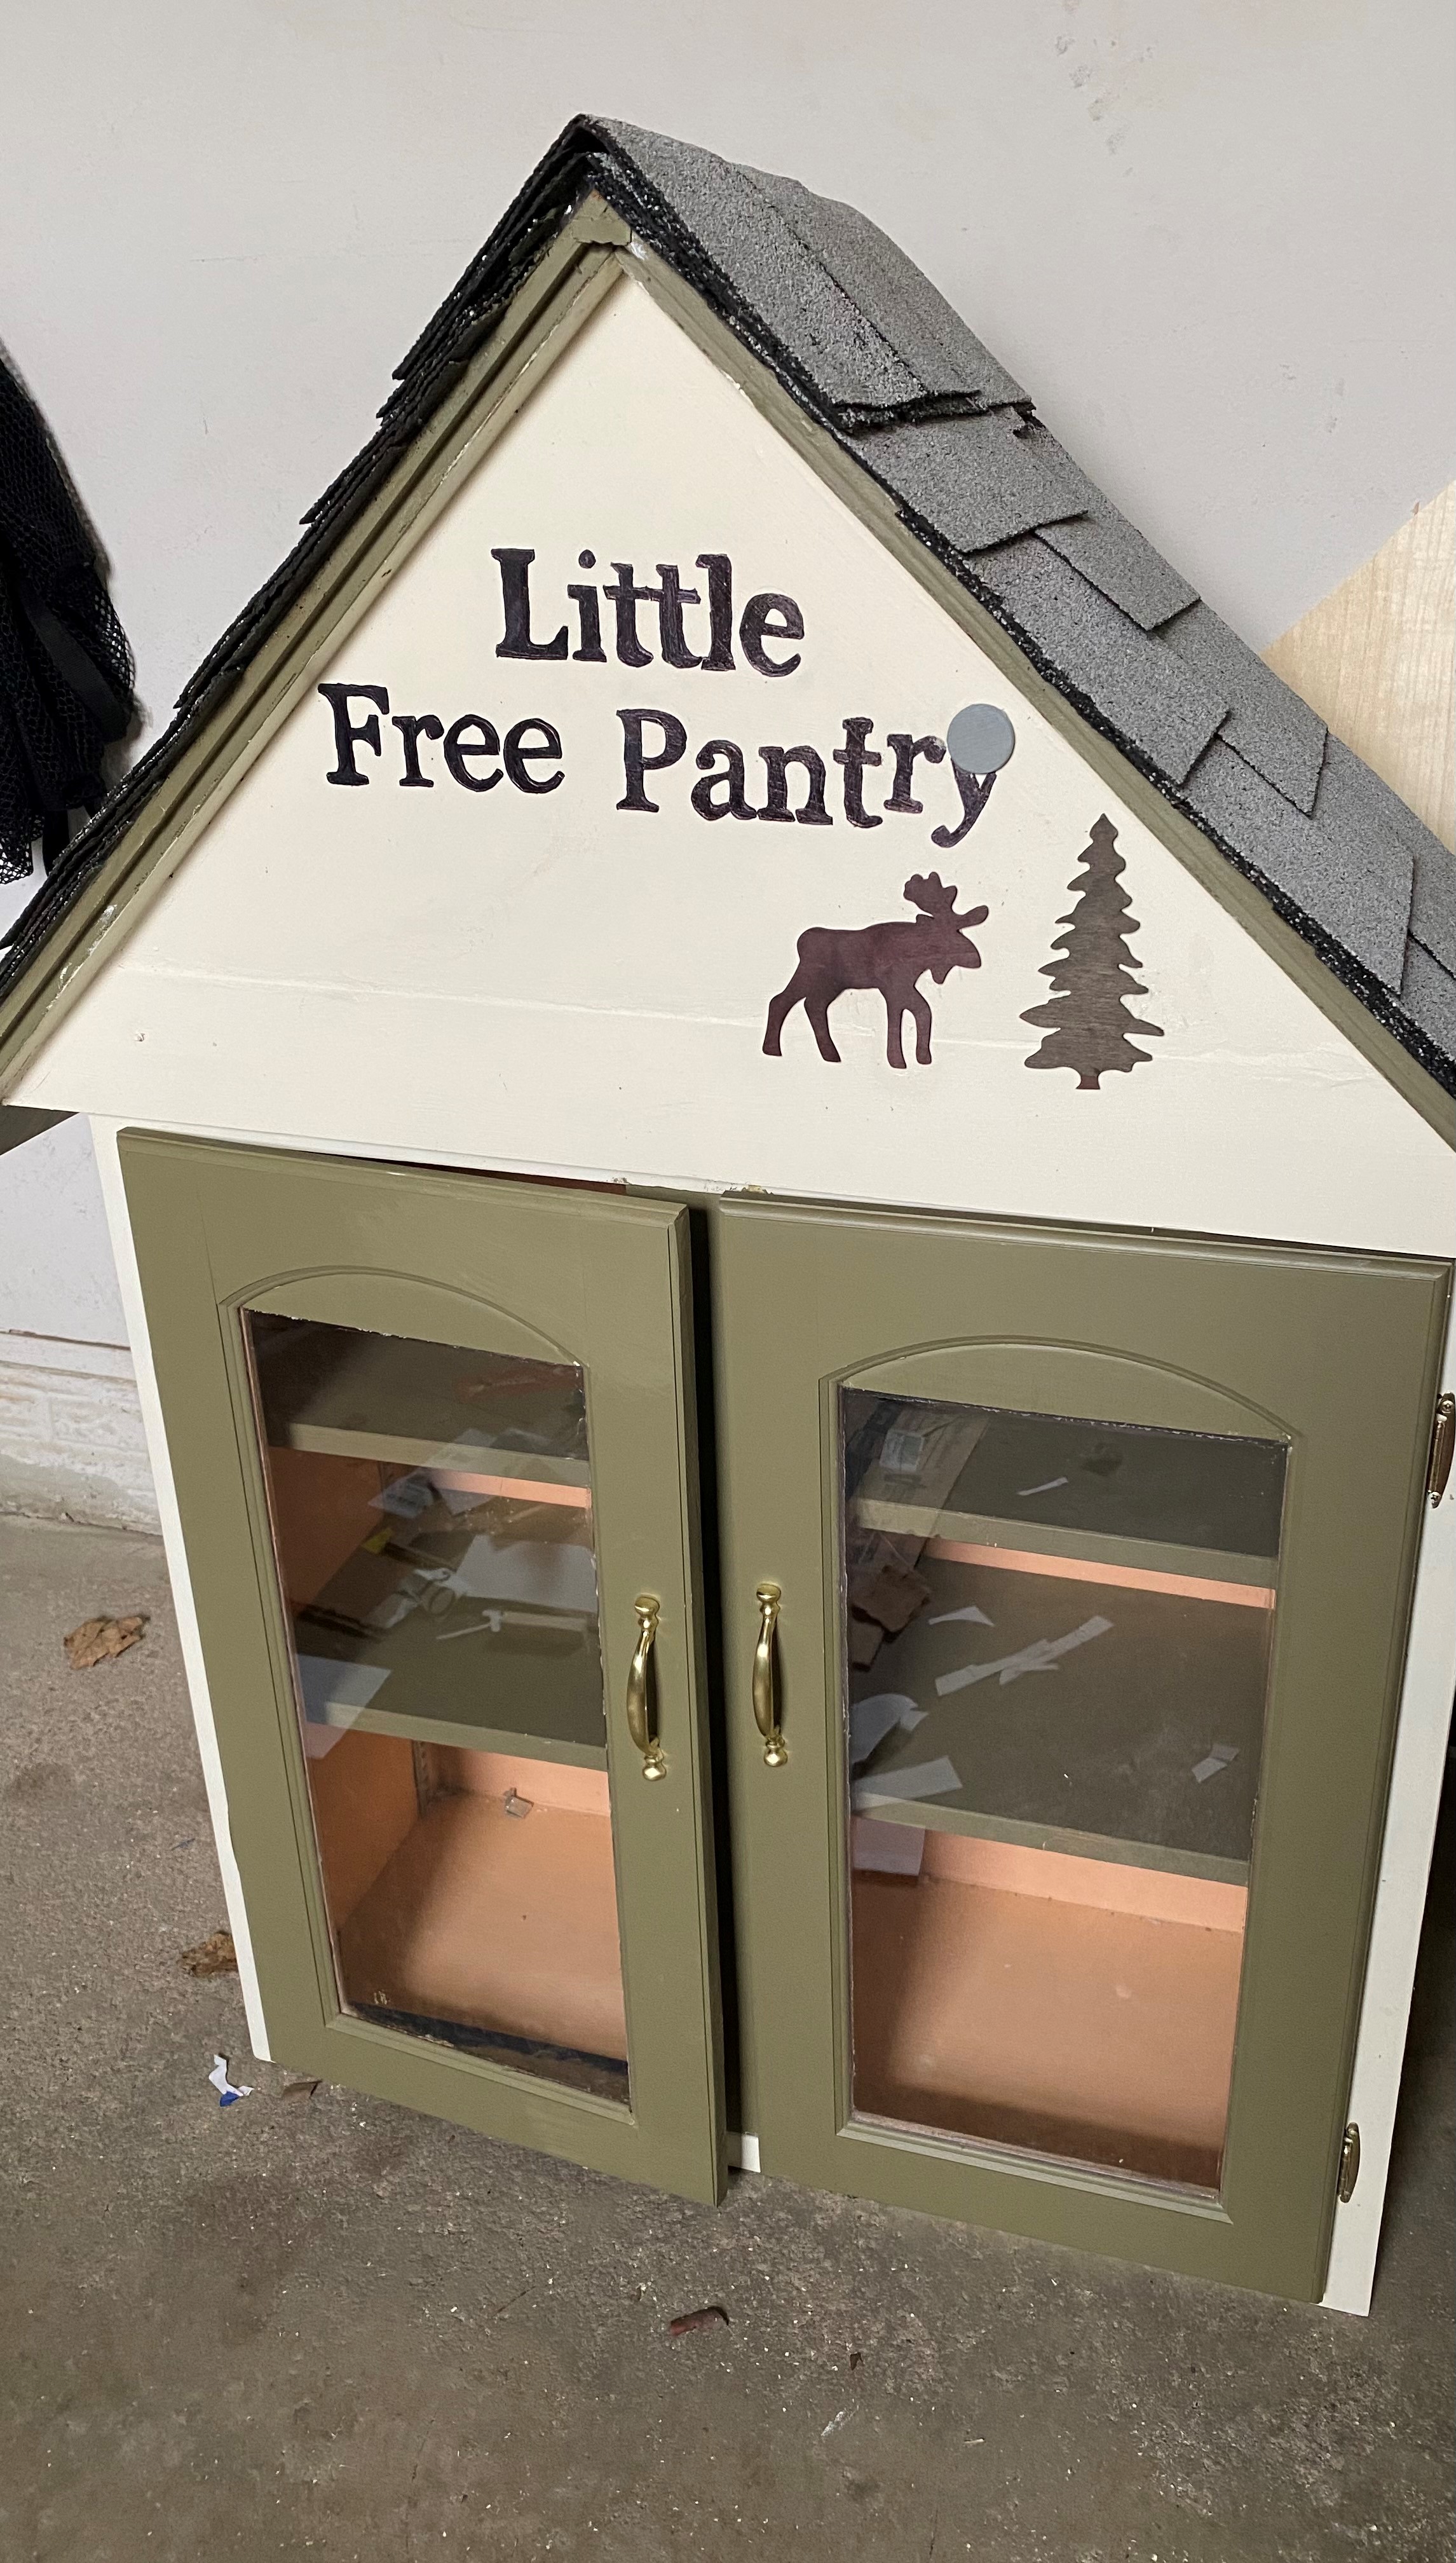 Little Free Pantry of Currie Photo 2